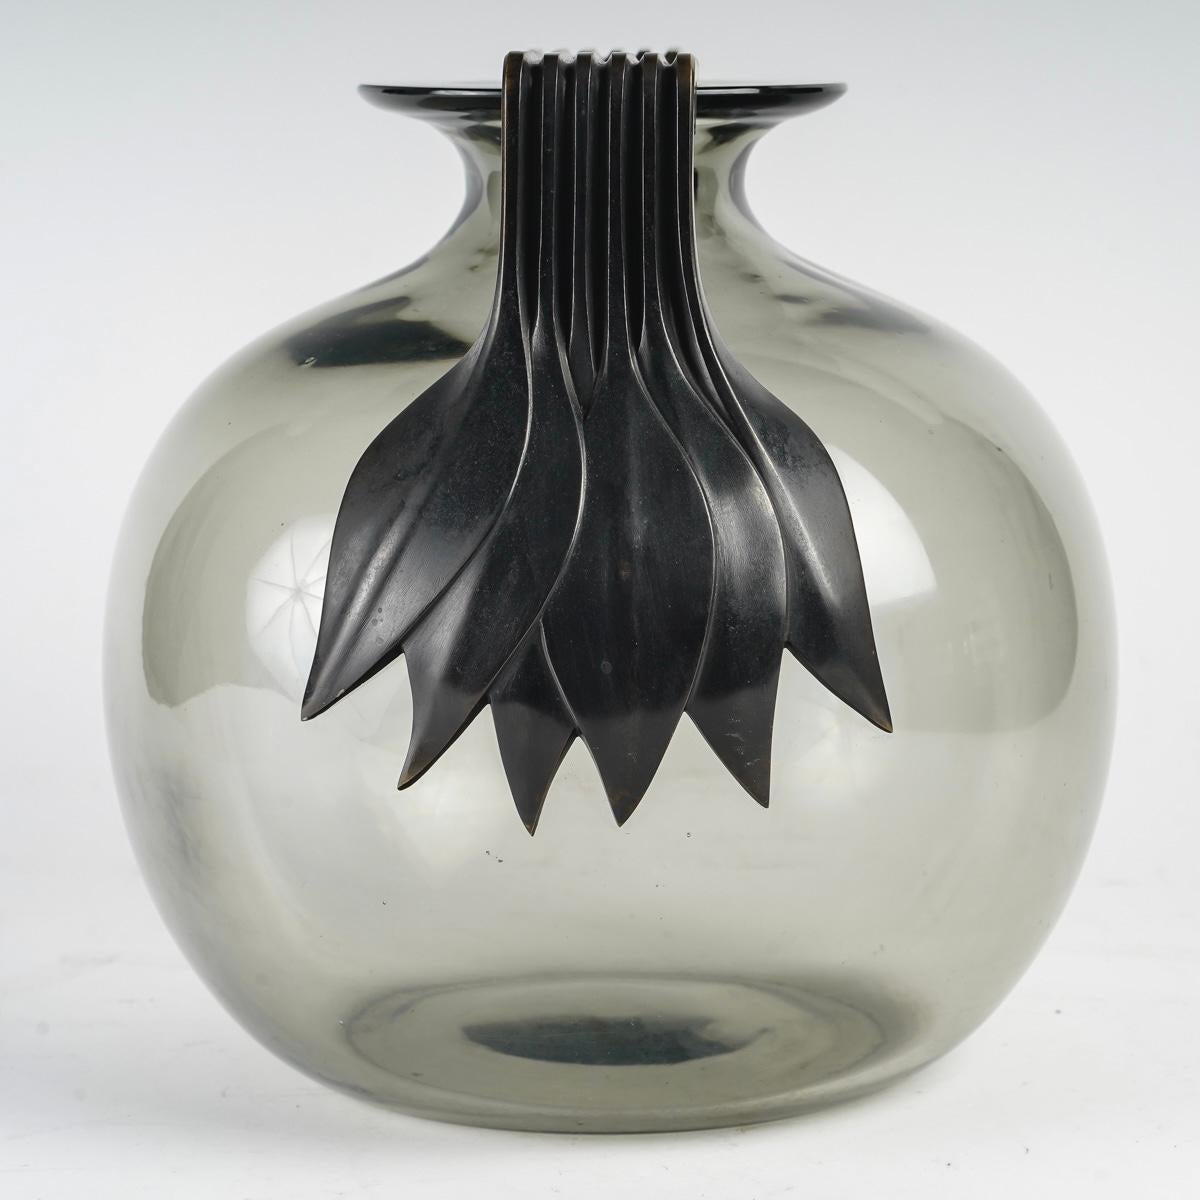 French 1925 Rene Lalique Vase Senlis Grey Glass with Bronze Handles For Sale